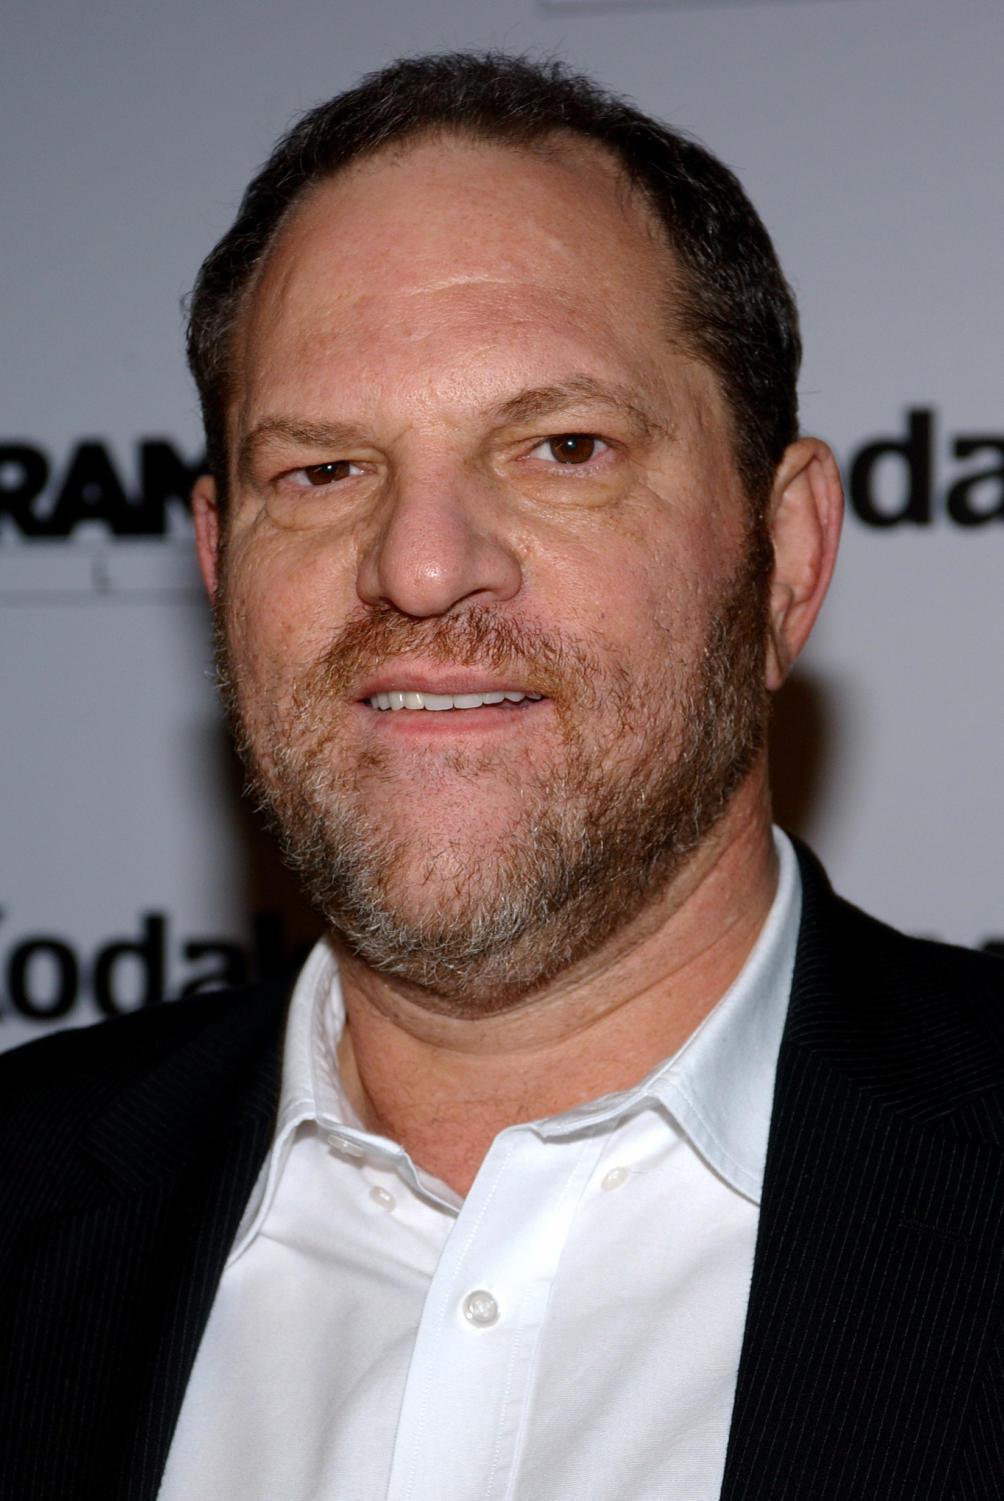 Producer Harvey Weinstein at the "Bride & Prejudice" premiere held at the UA Union Square theatre in New York, Wednesday February 9, 2005. (lde)